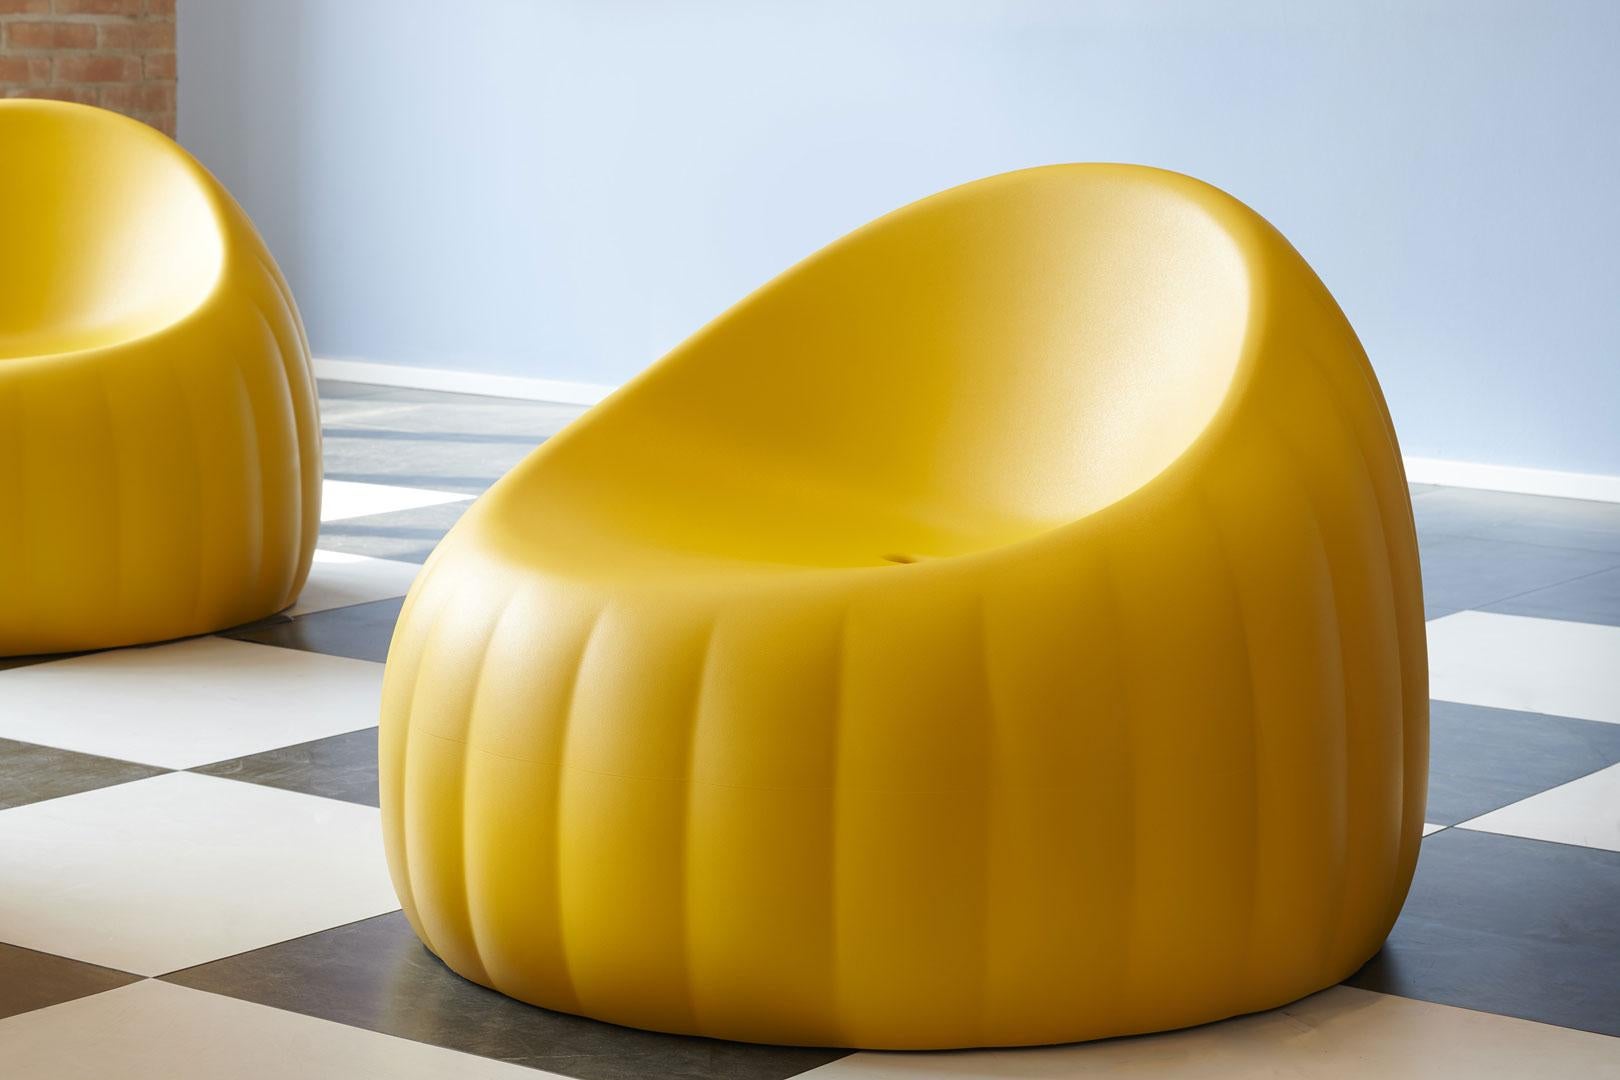 Soft Yellow Gelée Lounge Armchair by Roberto Paoli
Dimensions: Ø 96 x H 64 cm. Seat Height: 37 cm.
Materials: Soft polyurethane.
Weight: 17 kg.

Available in three different color options: soft white, soft argil and soft yellow. This product is